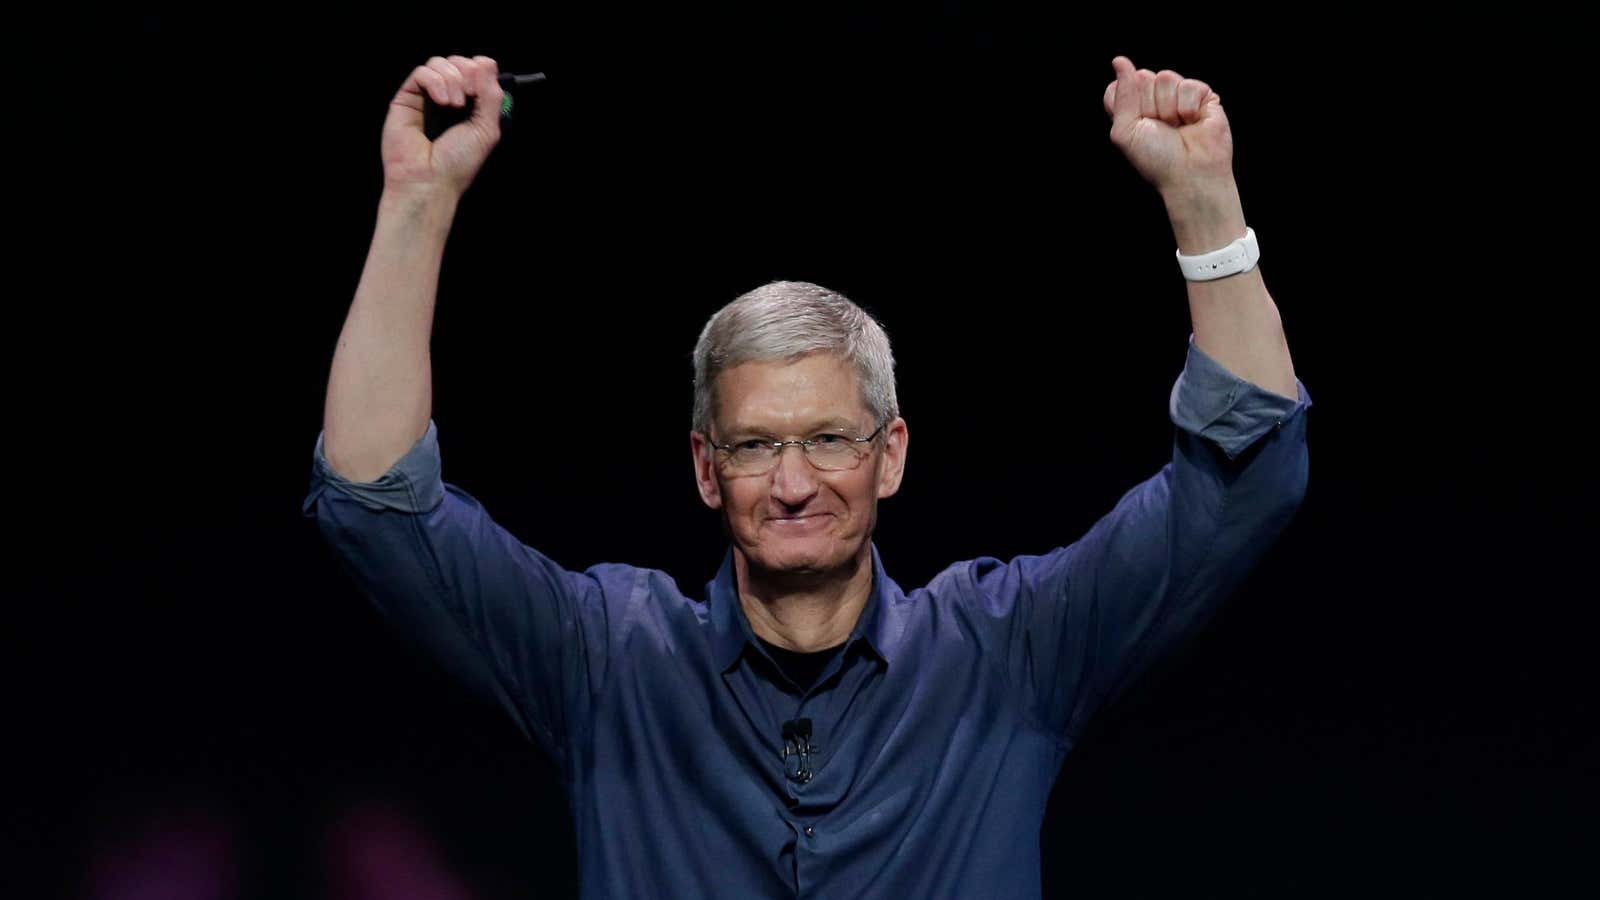 Another milestone for Apple CEO Tim Cook.